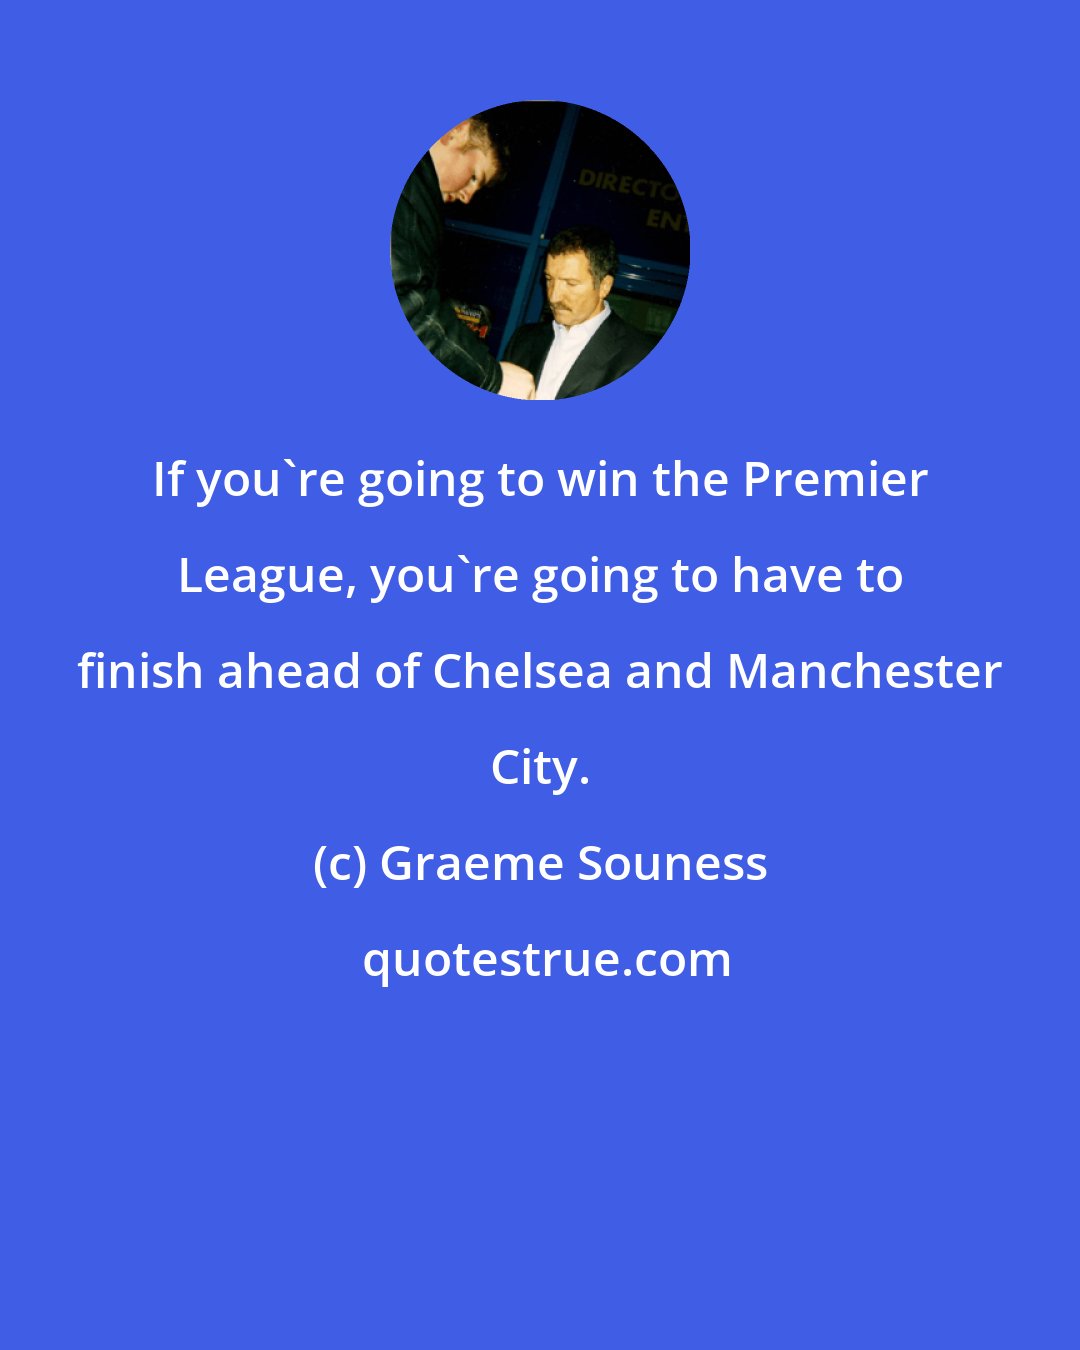 Graeme Souness: If you're going to win the Premier League, you're going to have to finish ahead of Chelsea and Manchester City.